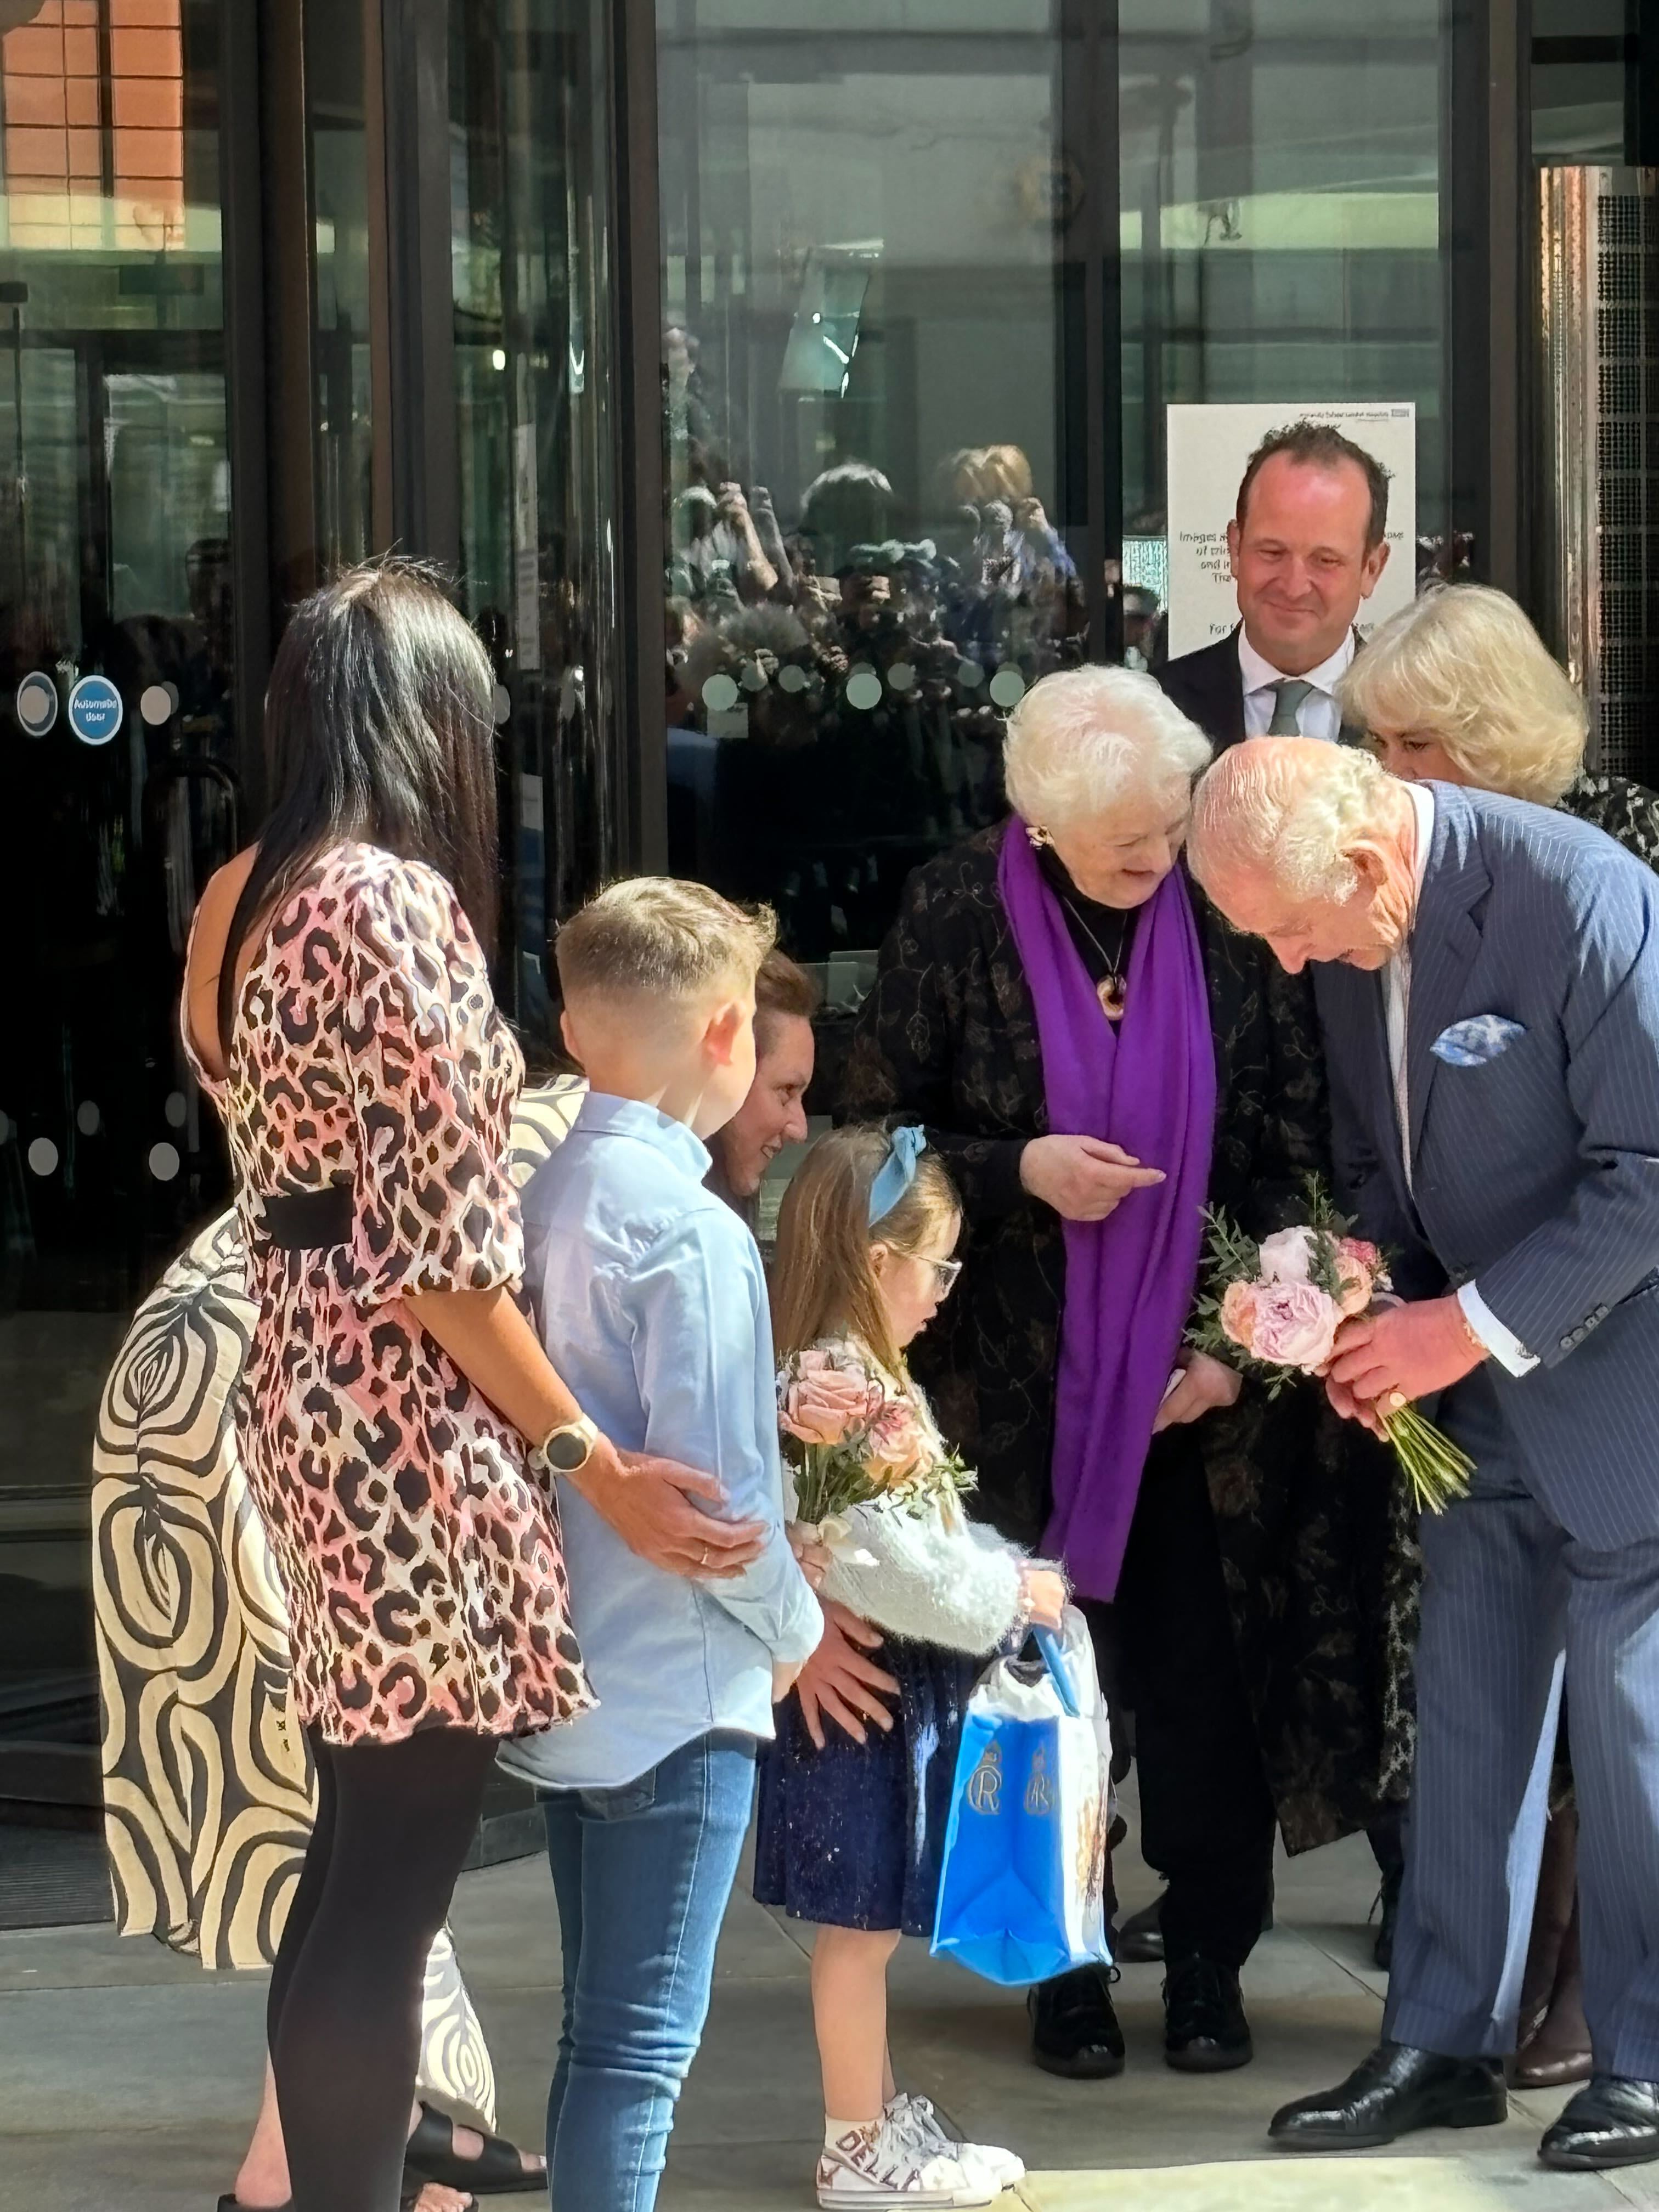 The King and Queen greeted the children who had waited to say goodbye to them